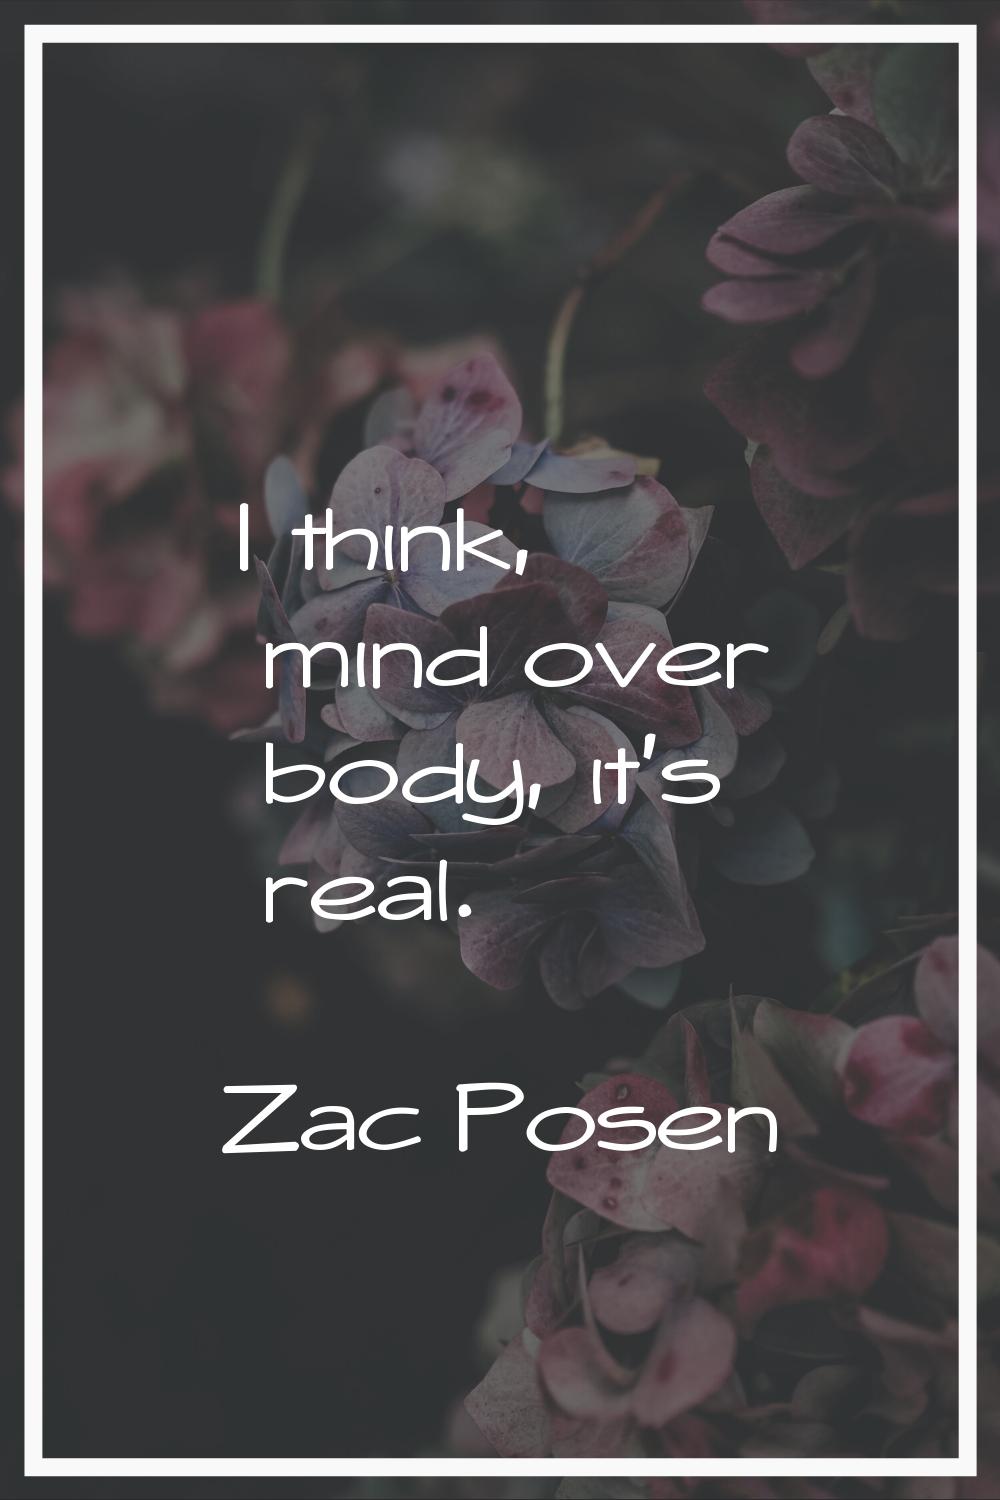 I think, mind over body, it's real.